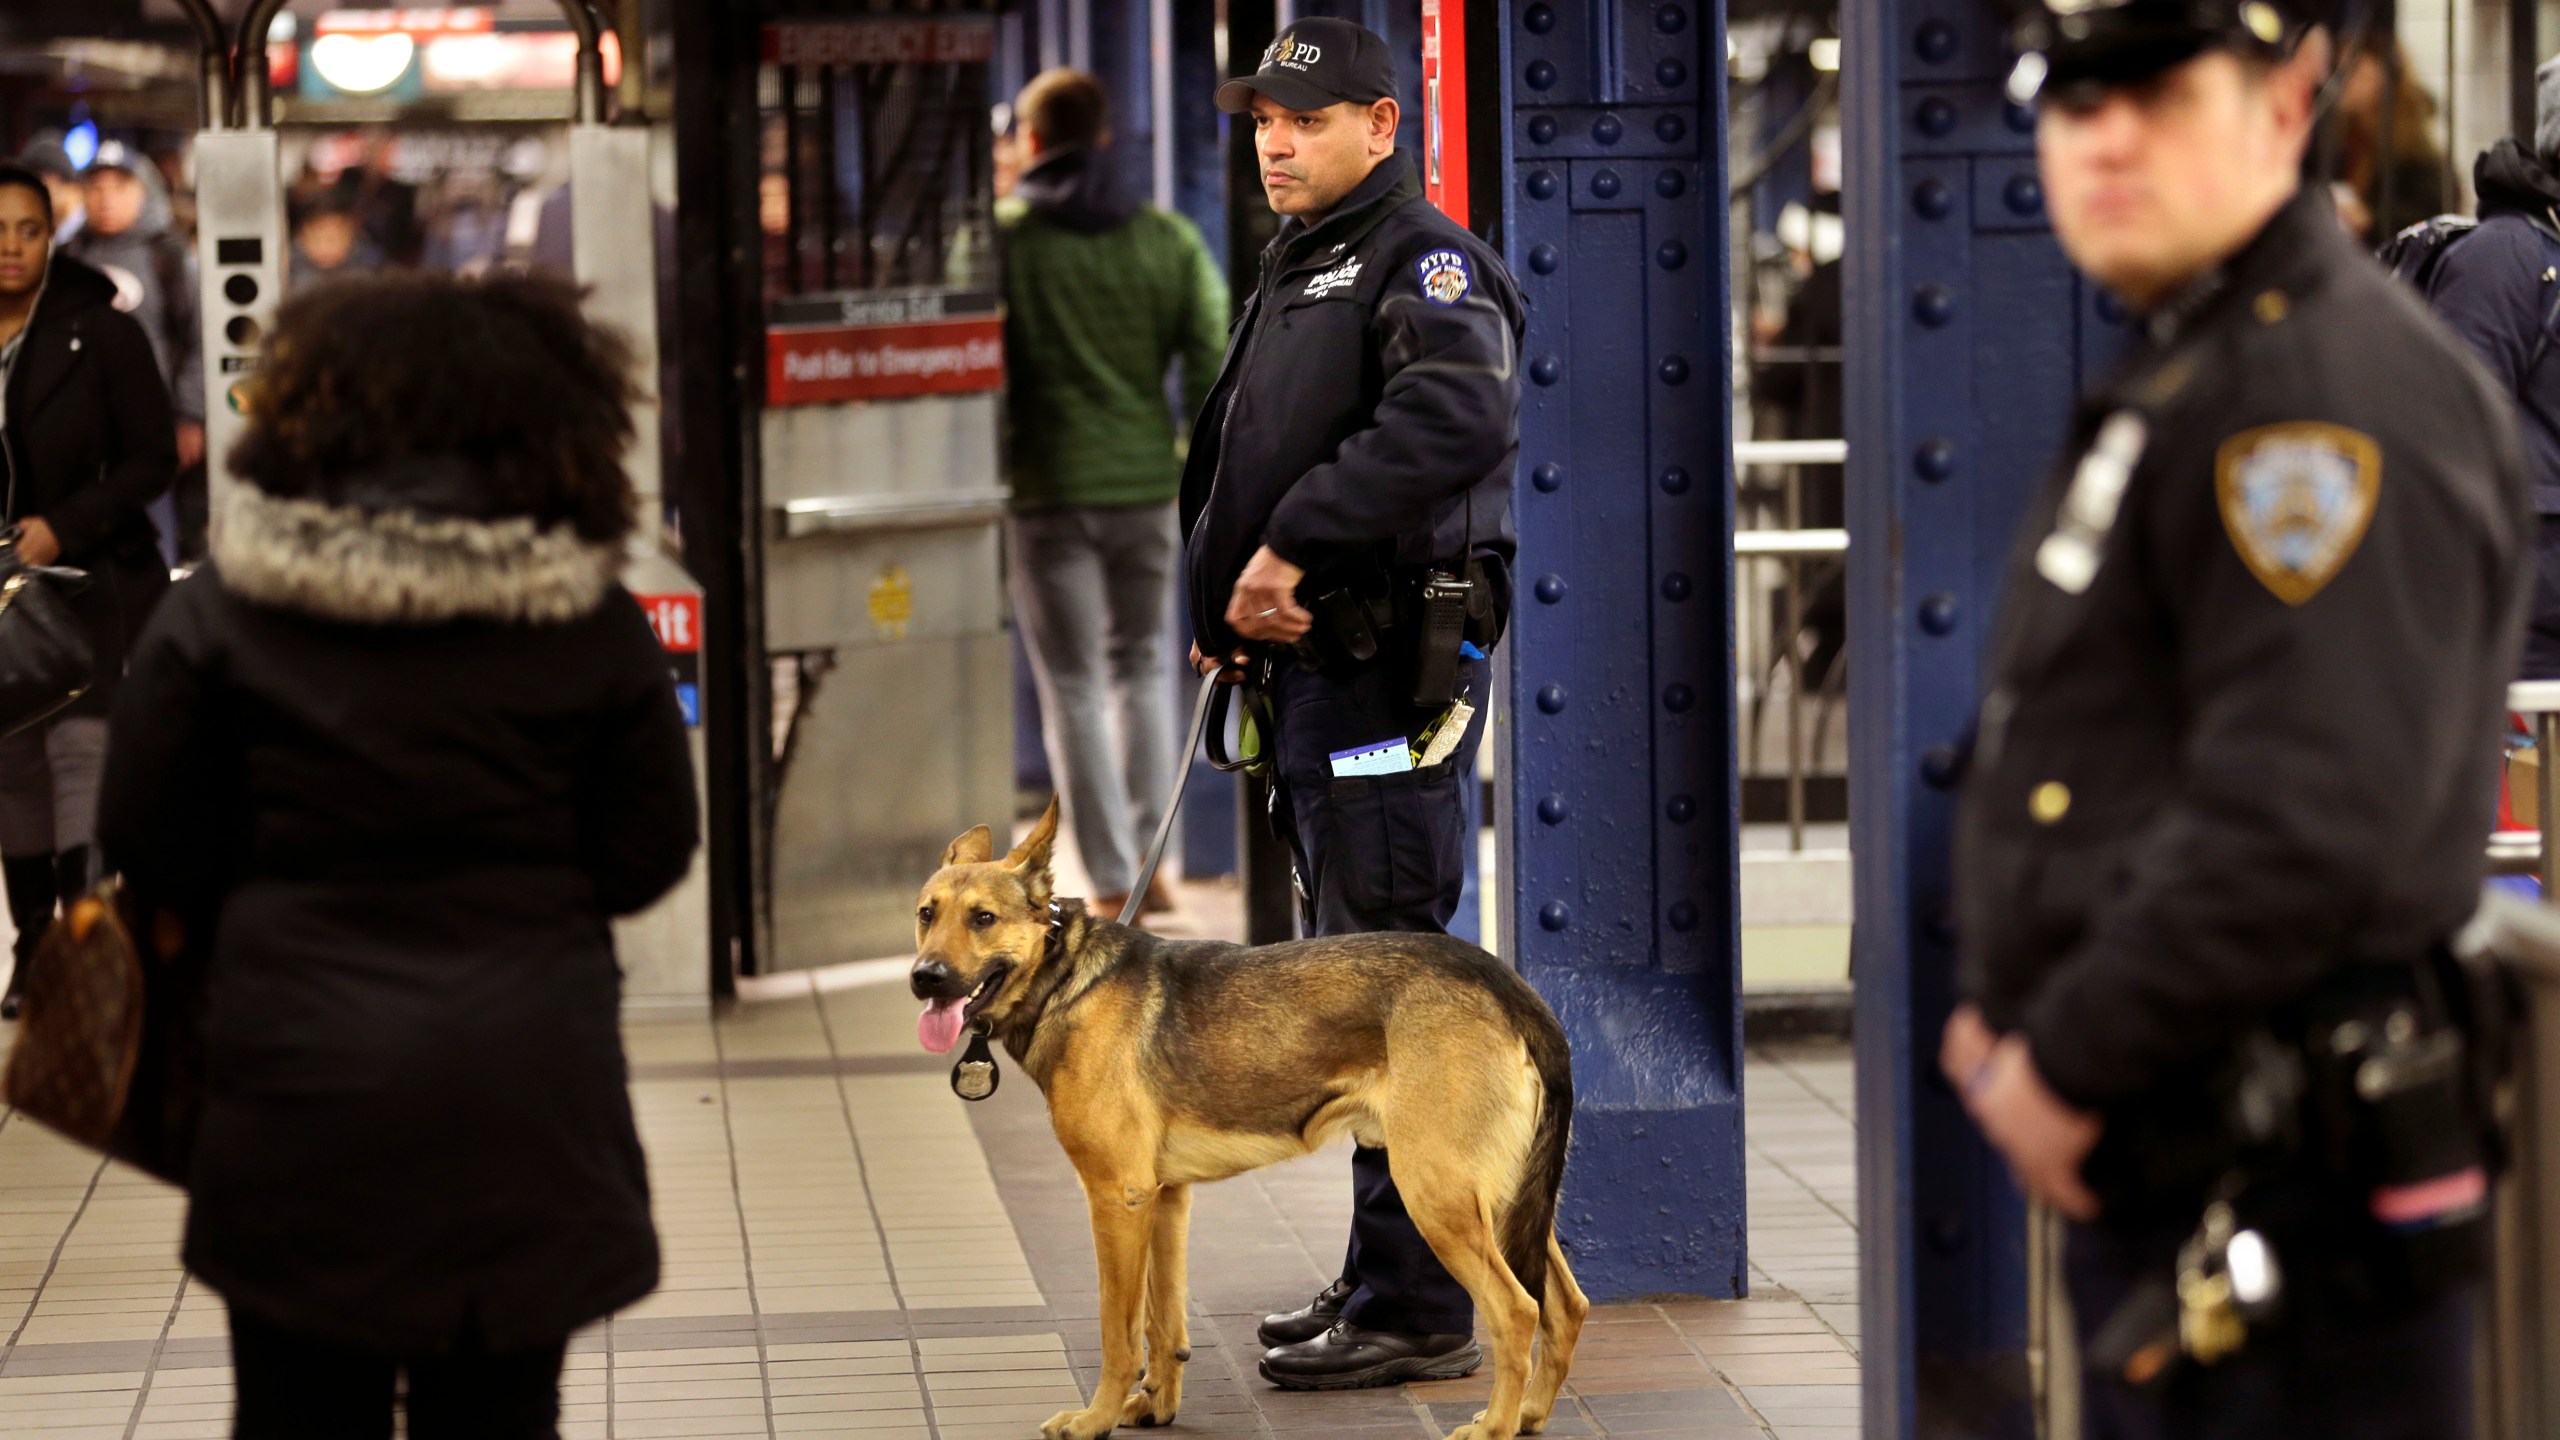 FILE - Police officers patrol in the passageway connecting New York City's Port Authority bus terminal and the Times Square subway station, Dec. 12, 2017. New York City plans to intensify a crackdown on subway fare-beating by sending at least 800 police officers specifically to keep watch on turnstiles, officials announced Monday, March 25, 2024. (AP Photo/Seth Wenig, File)